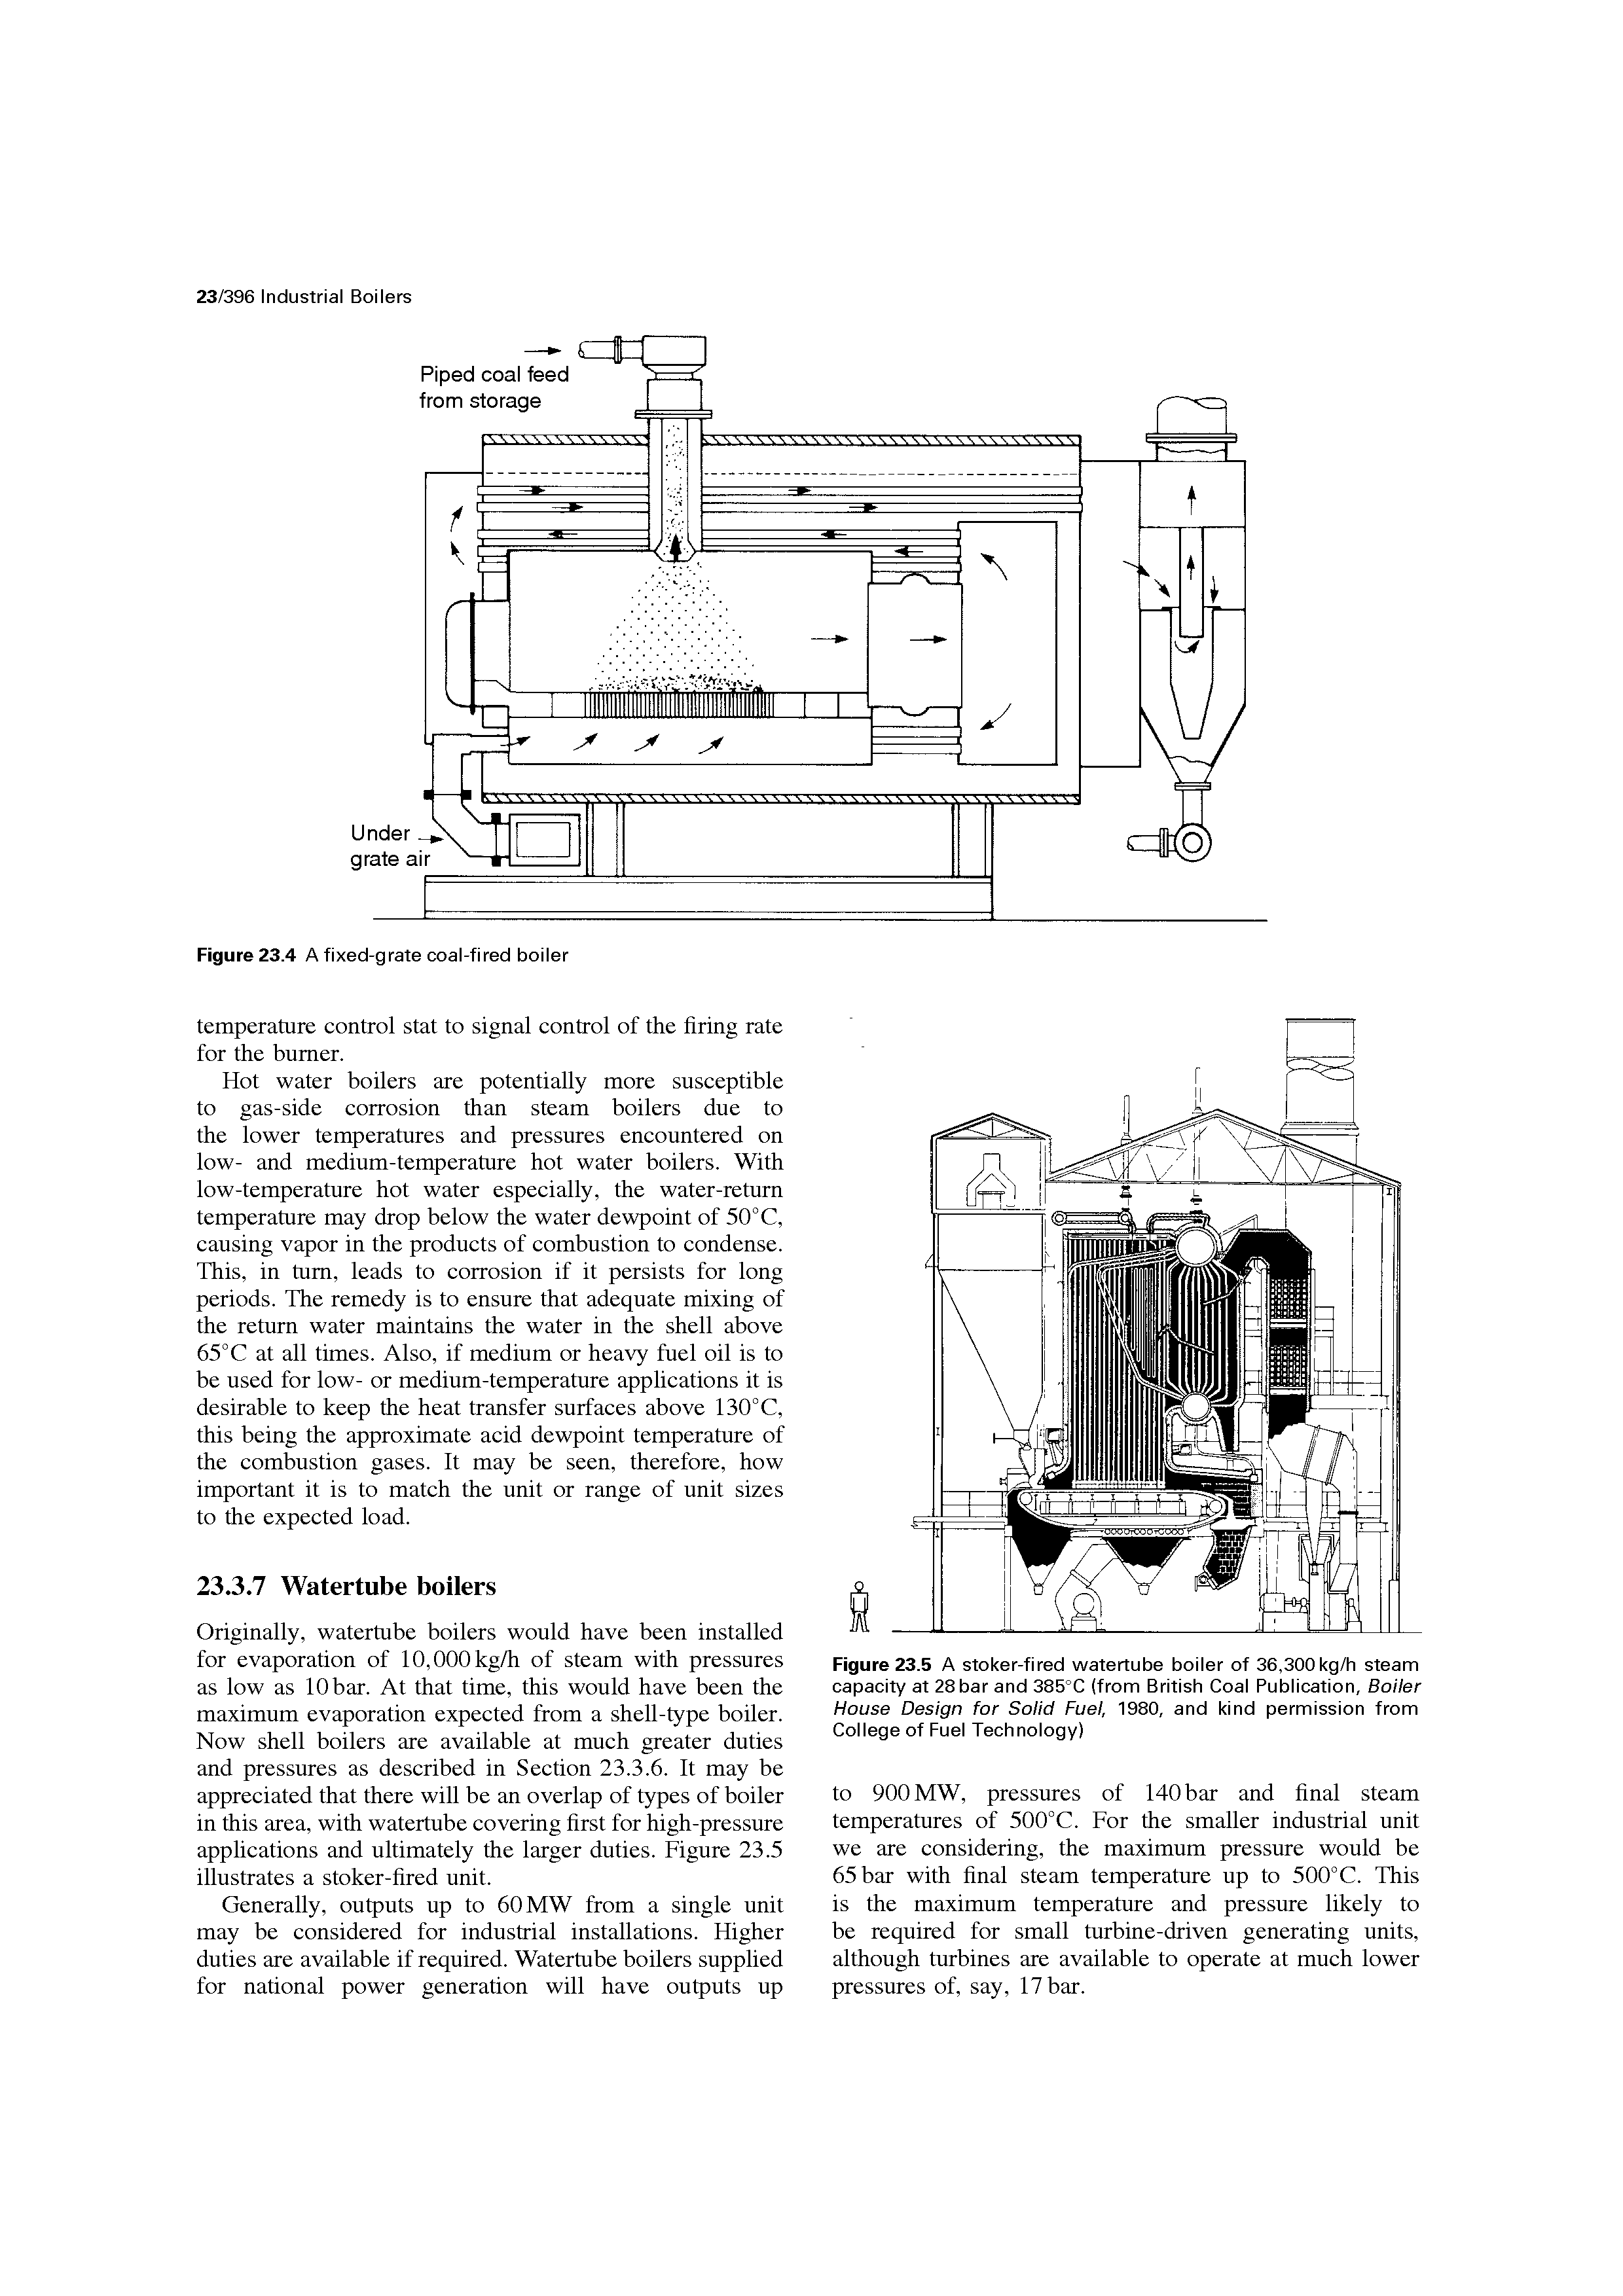 Figure 23.5 A stoker-fired watertube boiler of 36,300 kg/h steam capacity at 28 bar and 385°C (from British Coal Publication, Boiler House Design for Solid Fuel, 1980, and kind permission from College of Fuel Technology)...